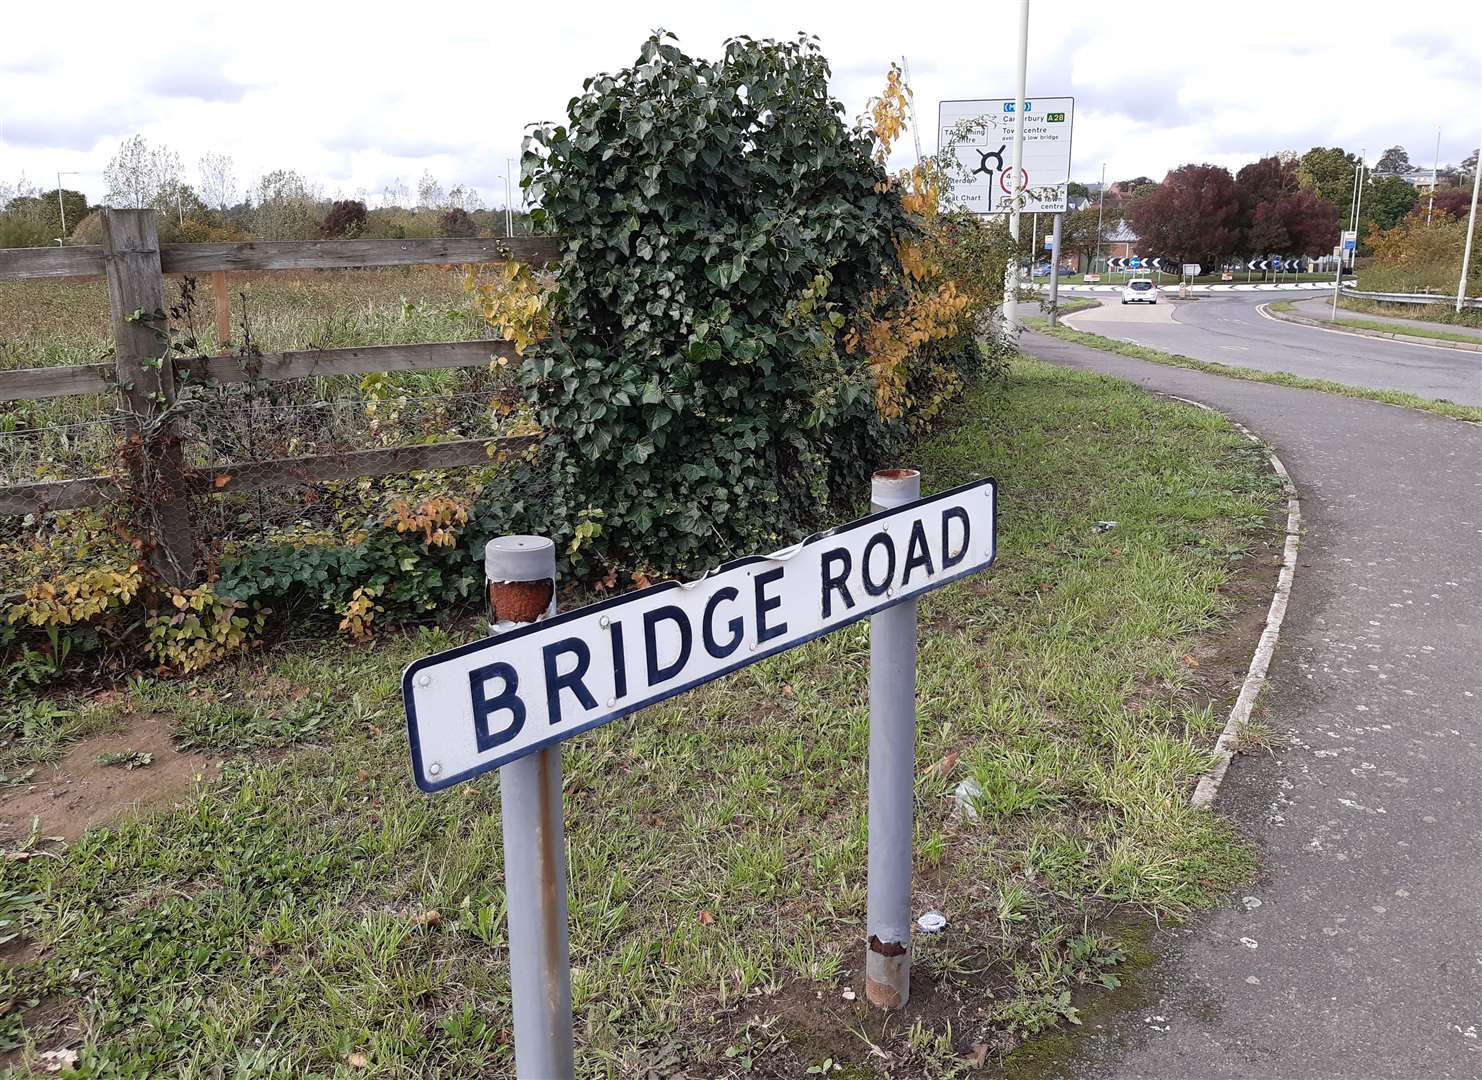 Drivers will access the site from Bridge Road